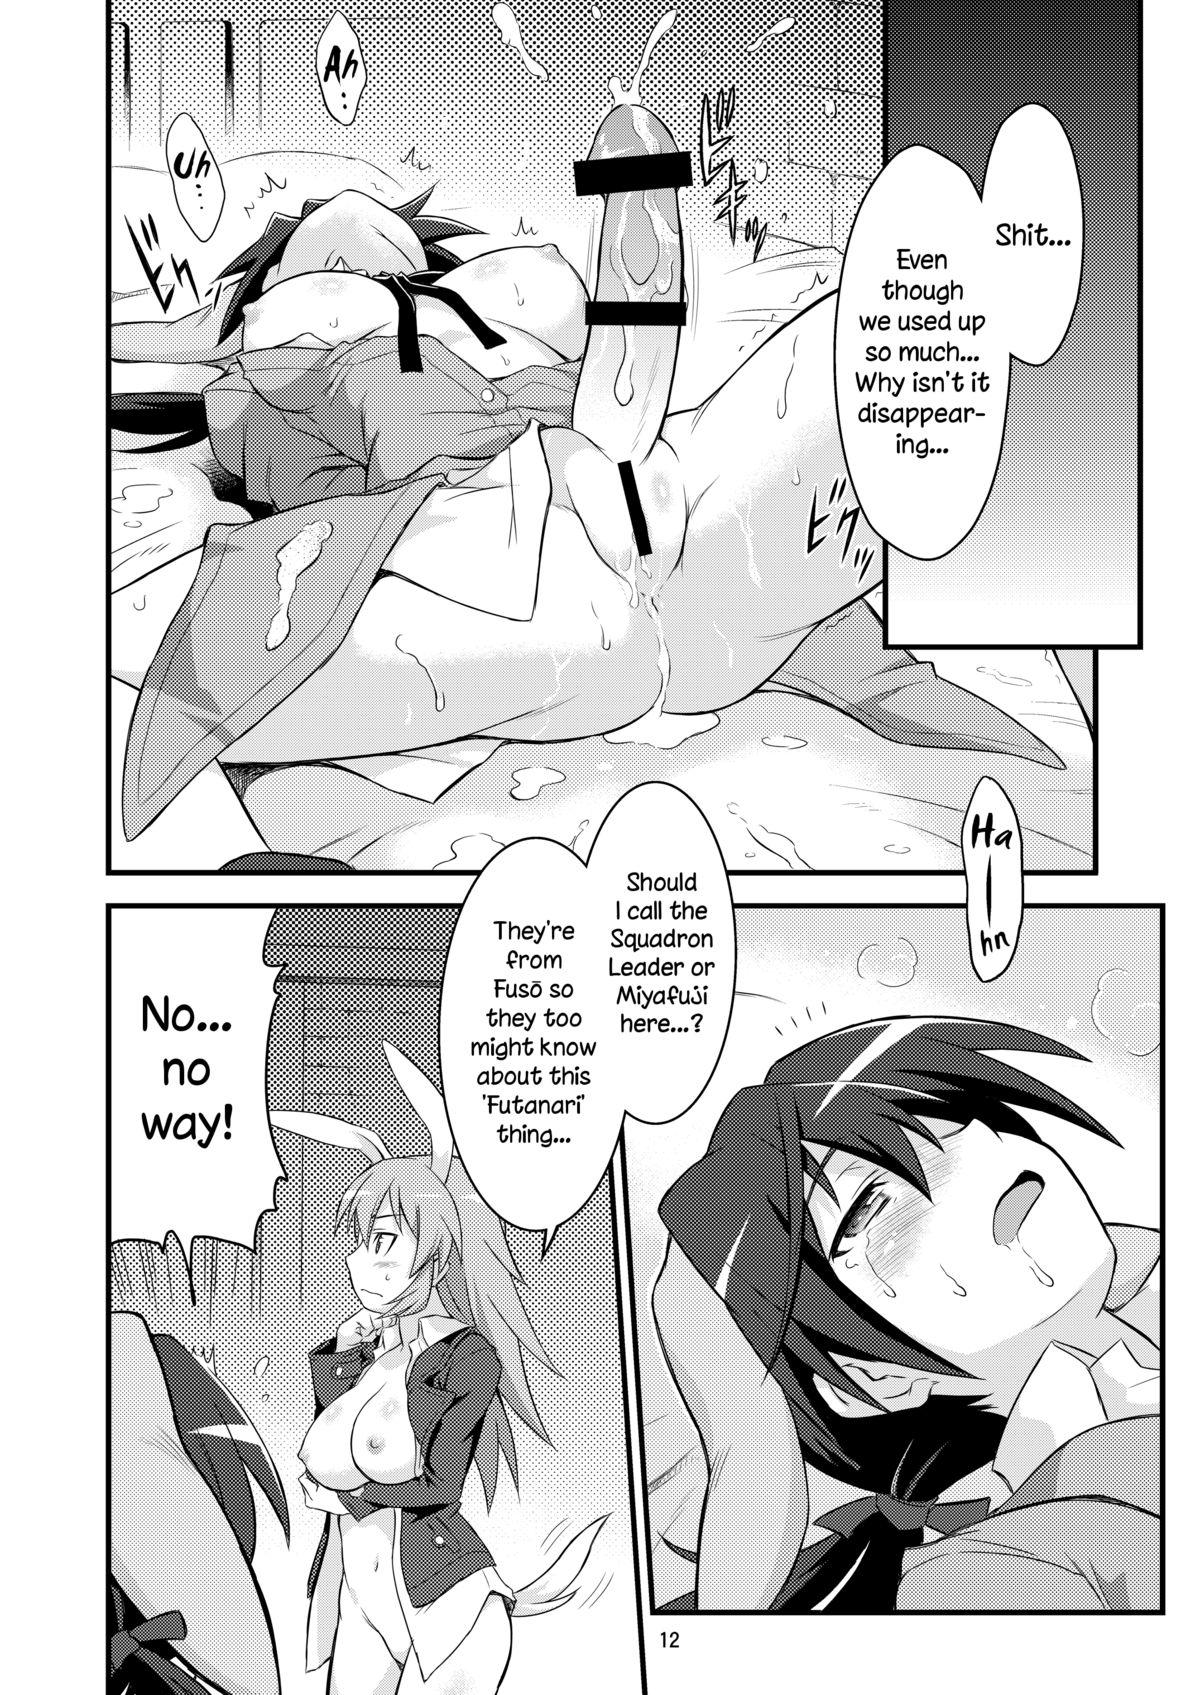 Maid Shir and Gert in Big Trouble - Strike witches Gay Brokenboys - Page 12